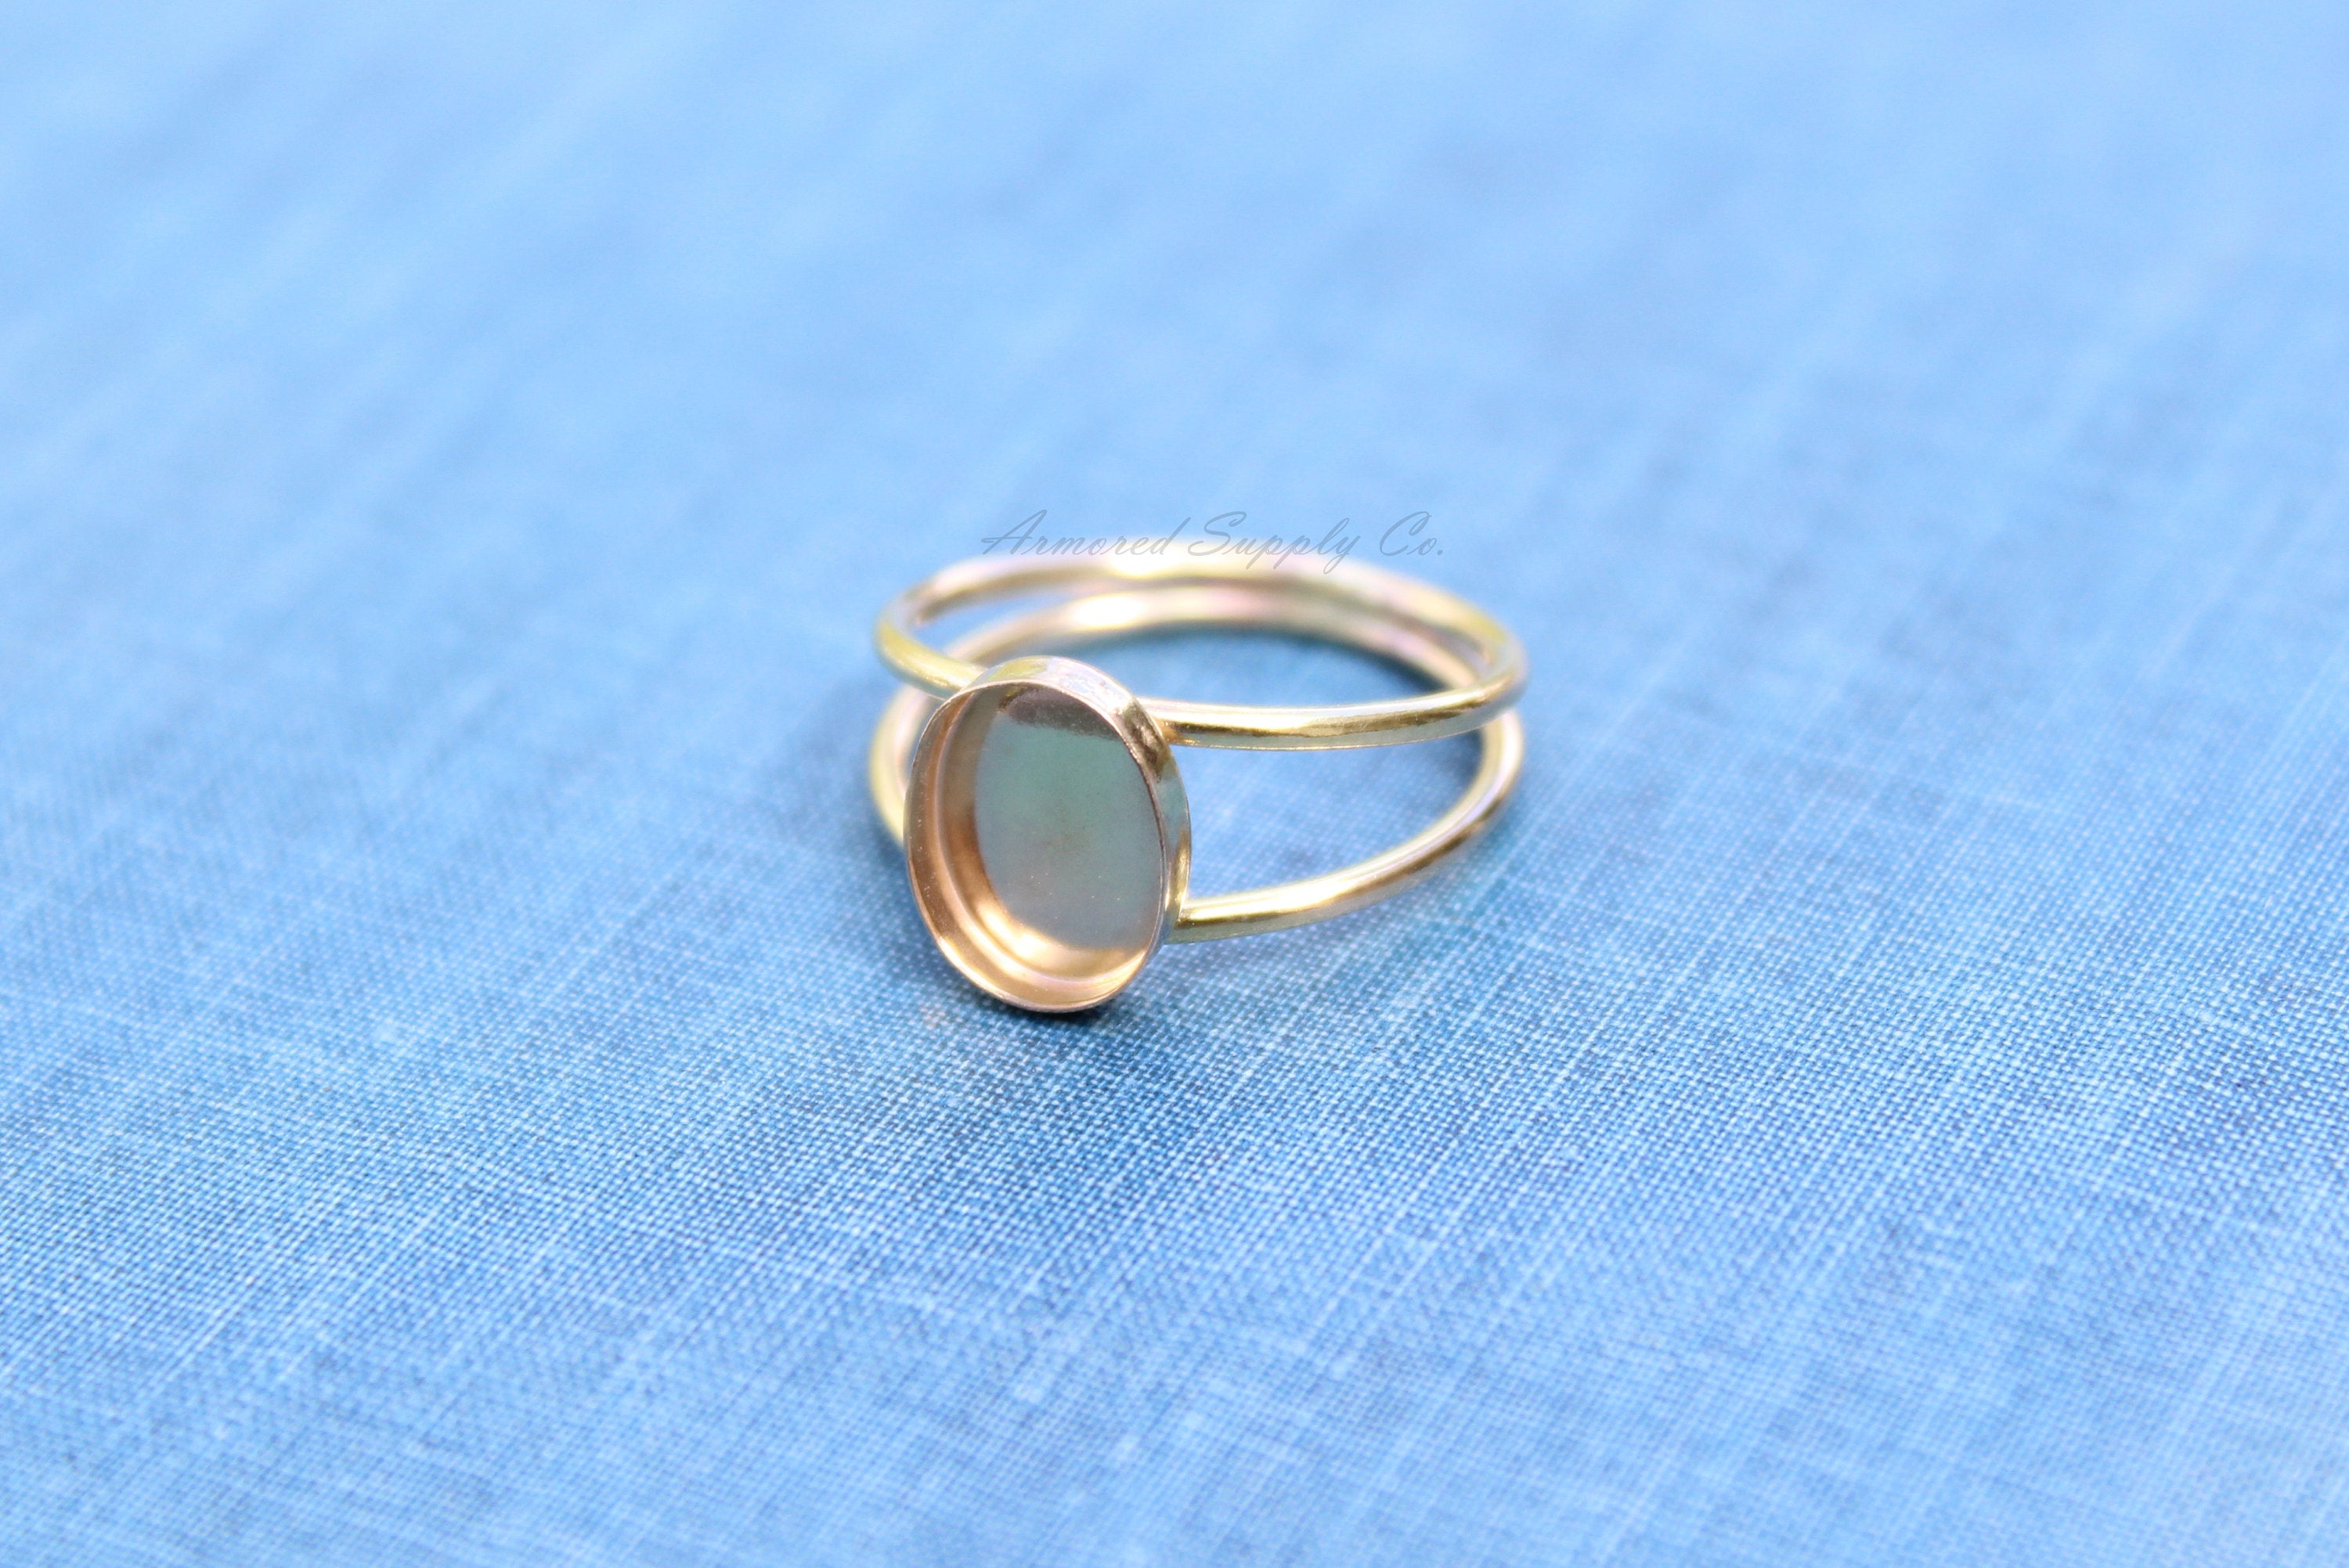 Gold Double Band Oval Bezel Cup Ring blank, Oval Cabochon, Oval Ring Blank, Oval Bezel, DIY jewelry supplies, wholesale jewelry, diy ring